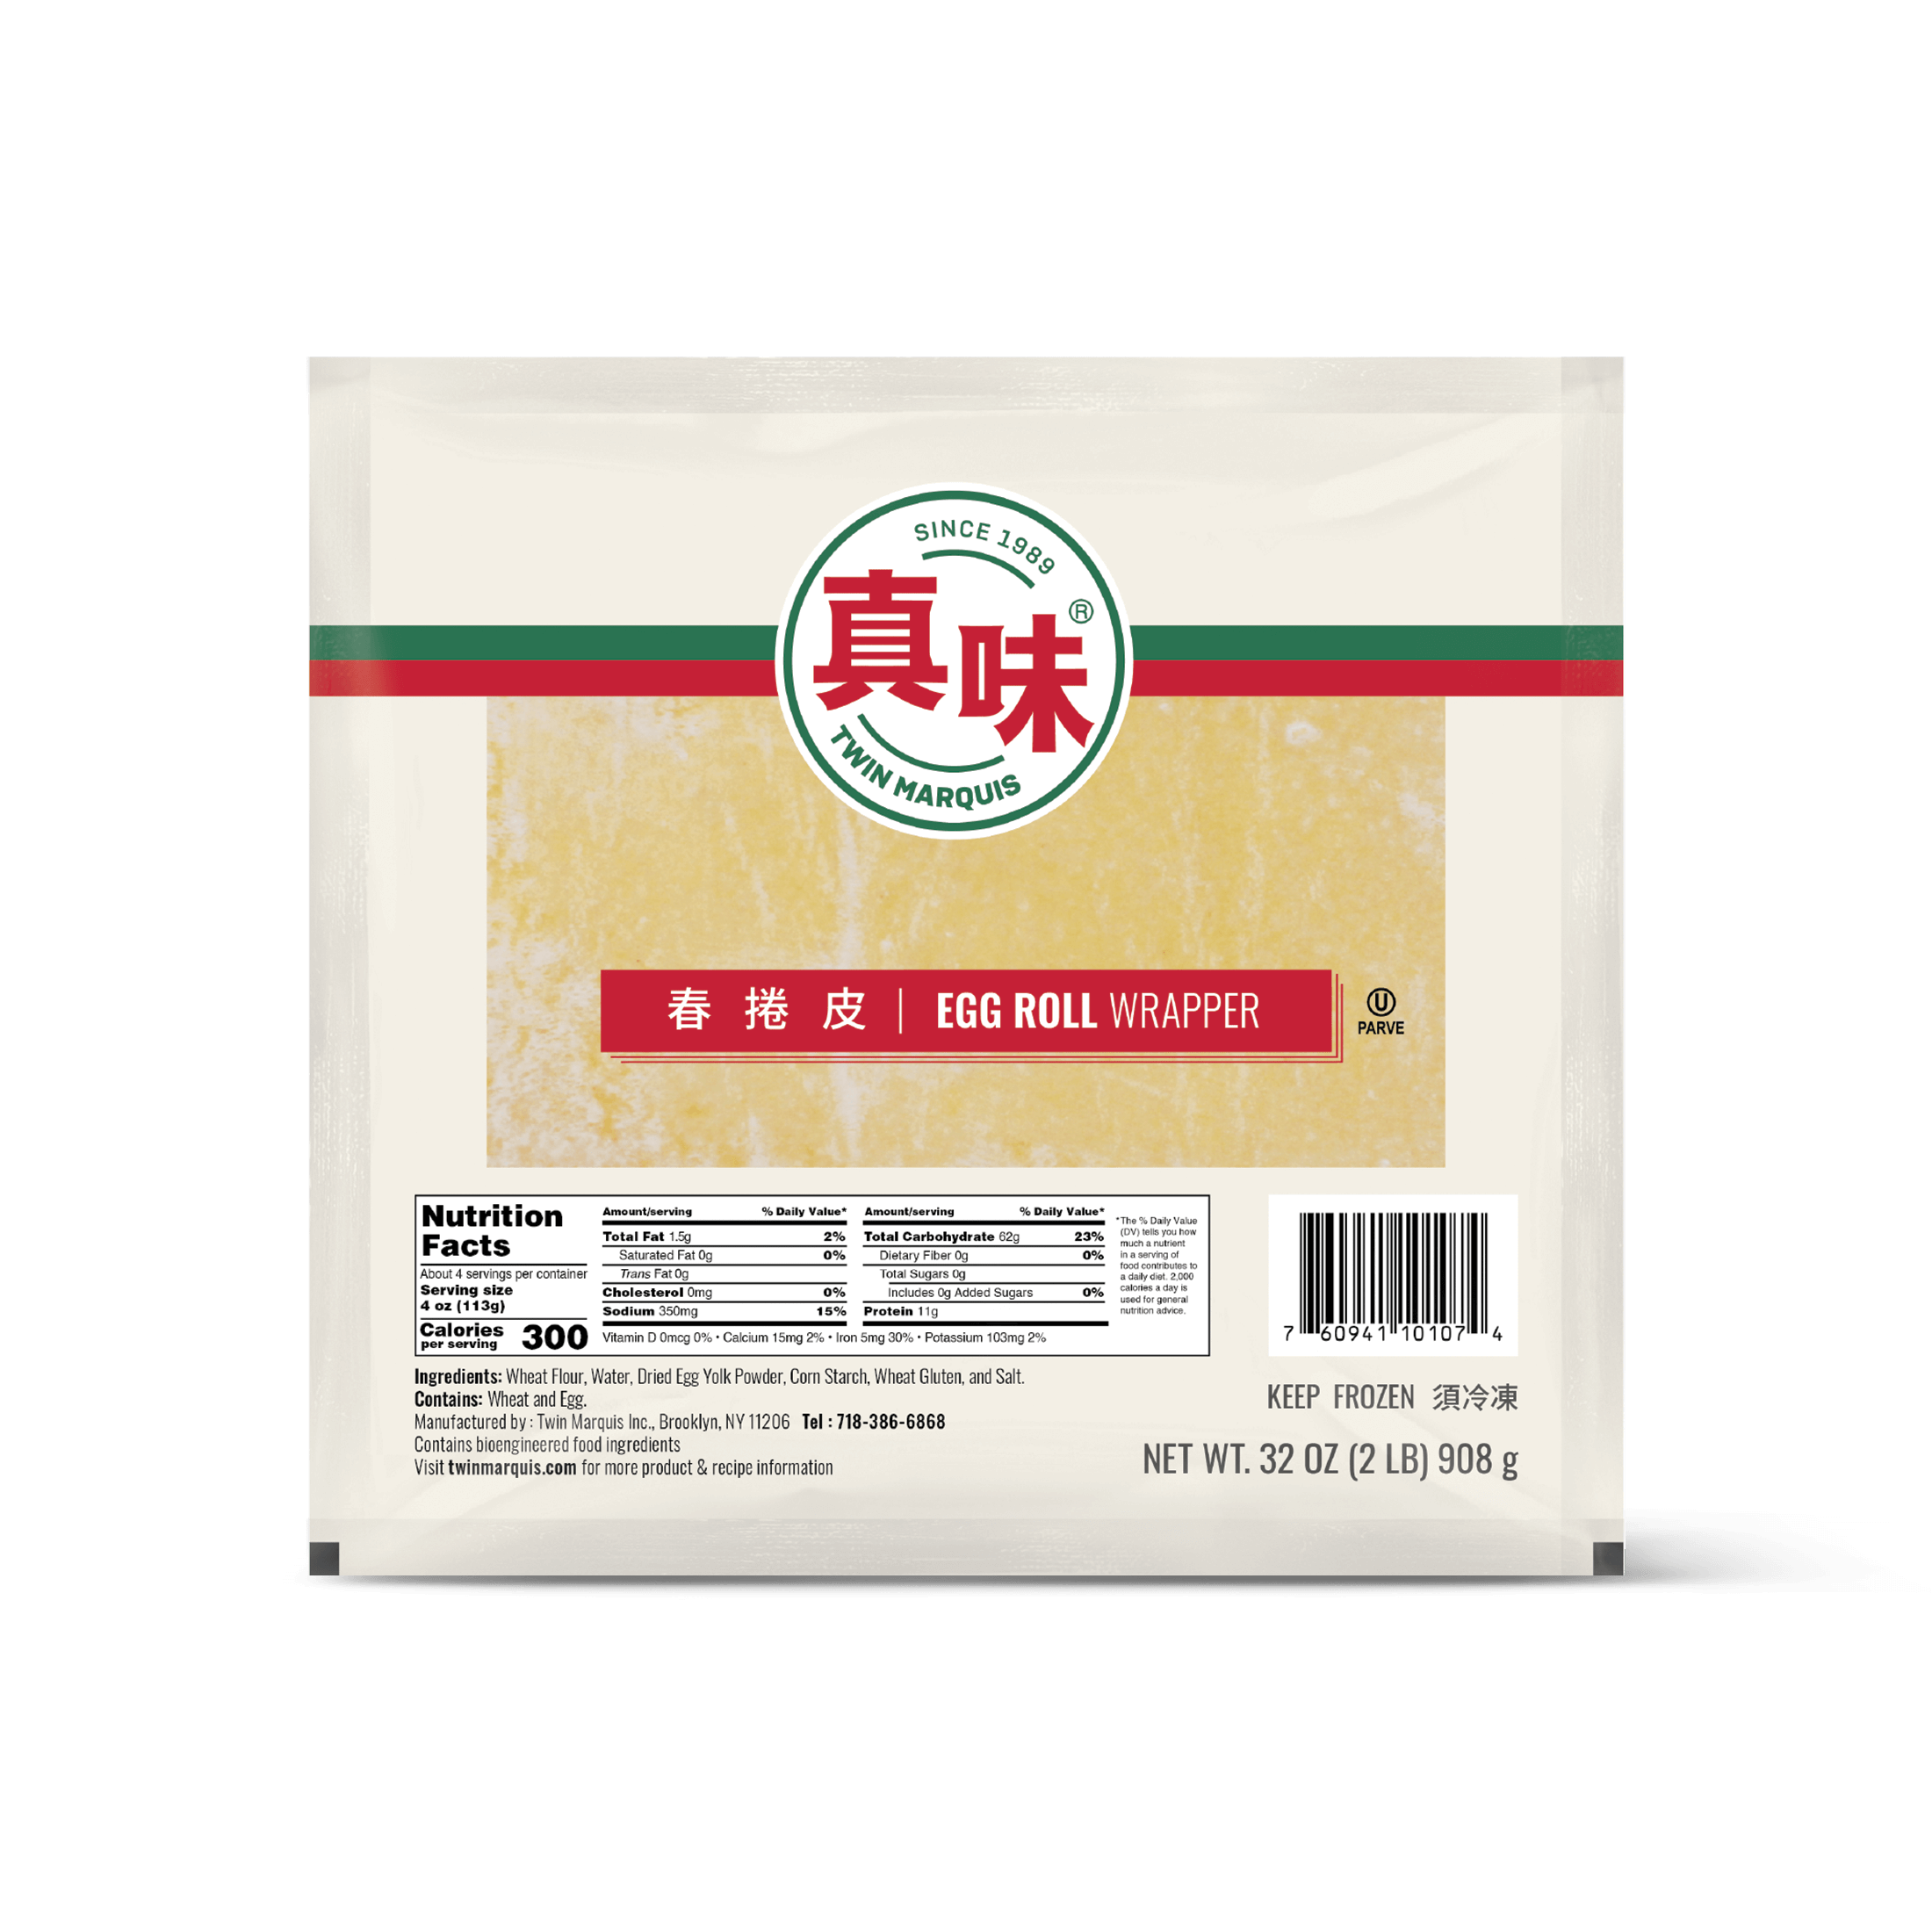 https://www.twinmarquis.com/wp-content/uploads/2017/06/Egg-Roll-Wrapper-32oz.png